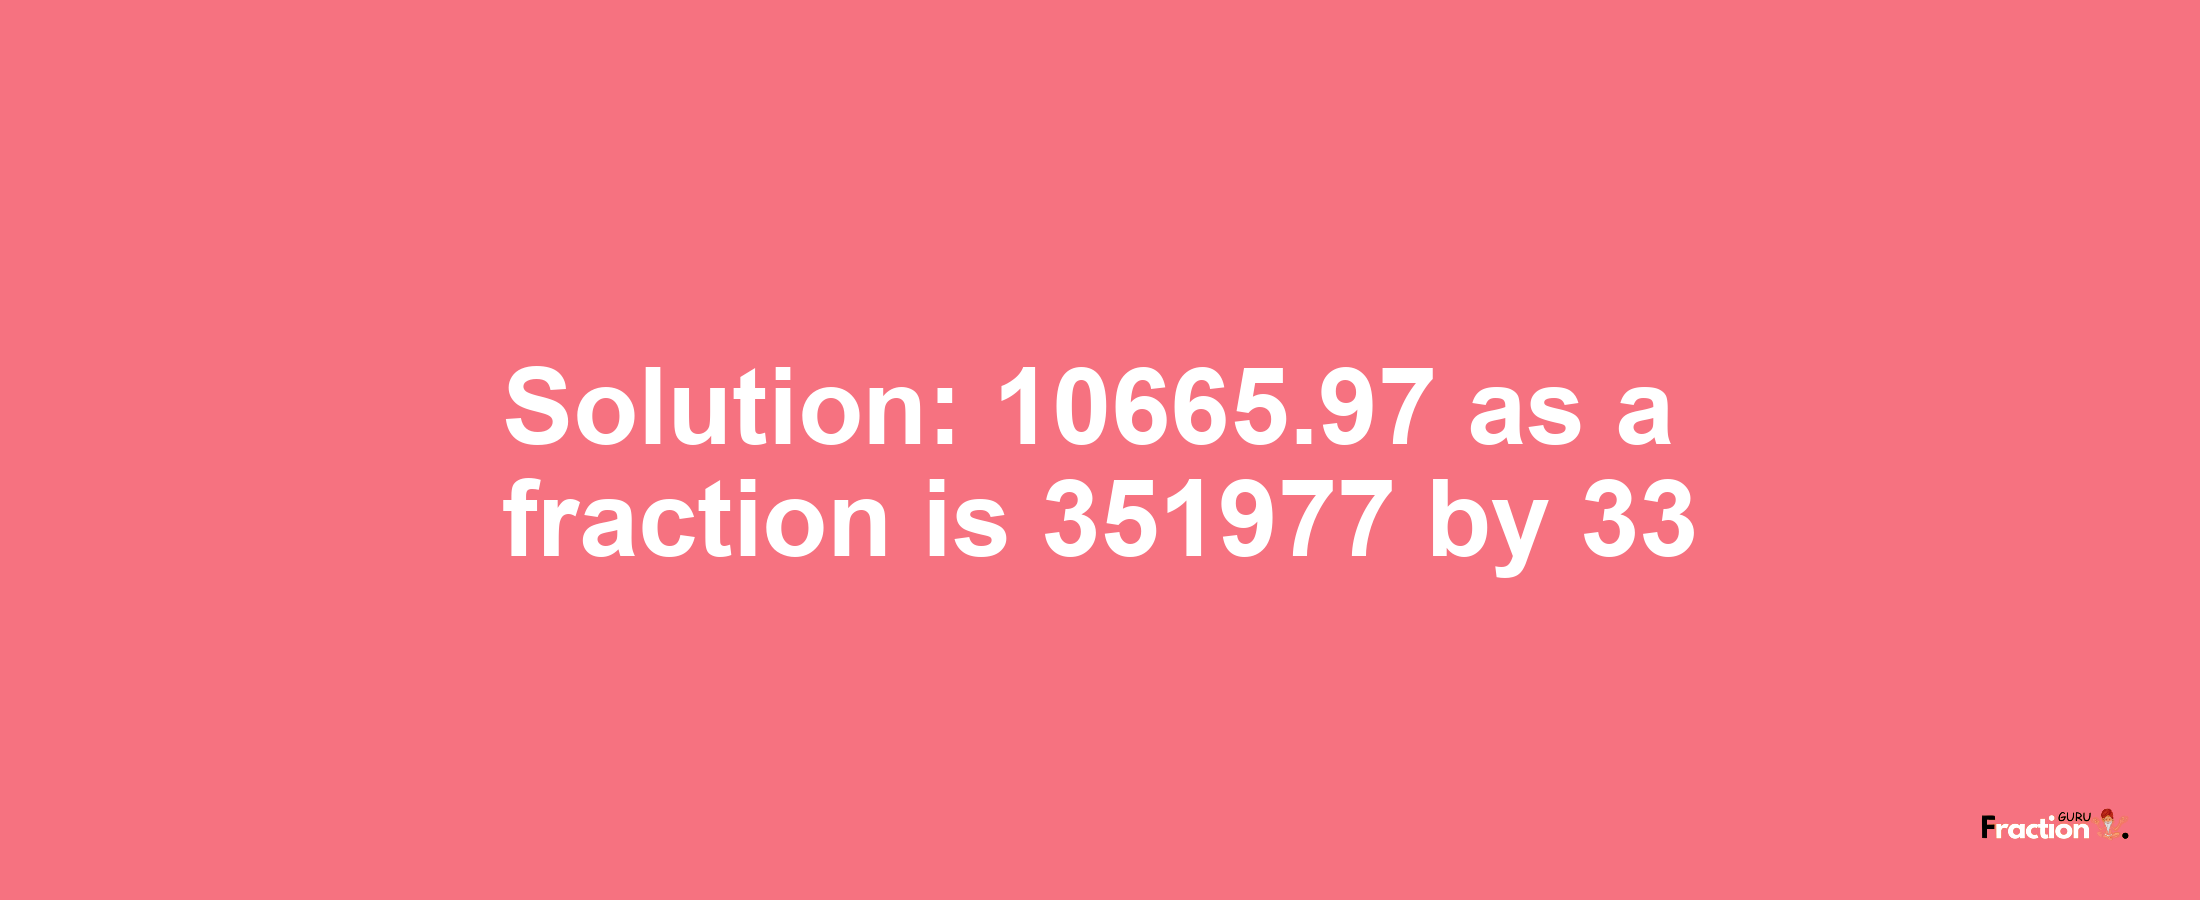 Solution:10665.97 as a fraction is 351977/33